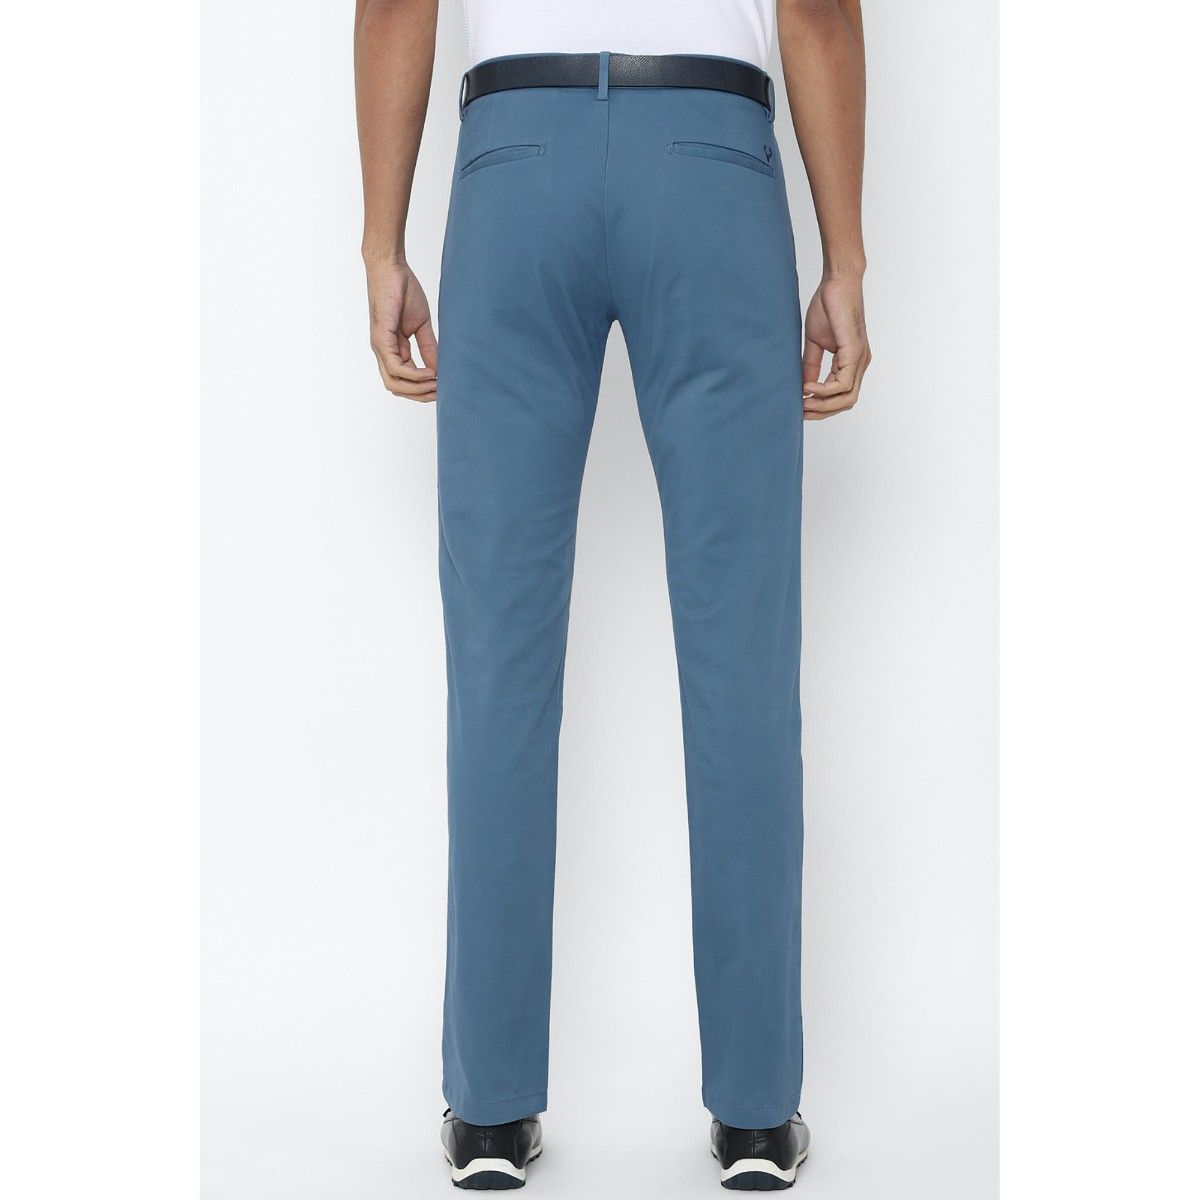 Allen Solly Regular Fit Women Blue Trousers - Price History